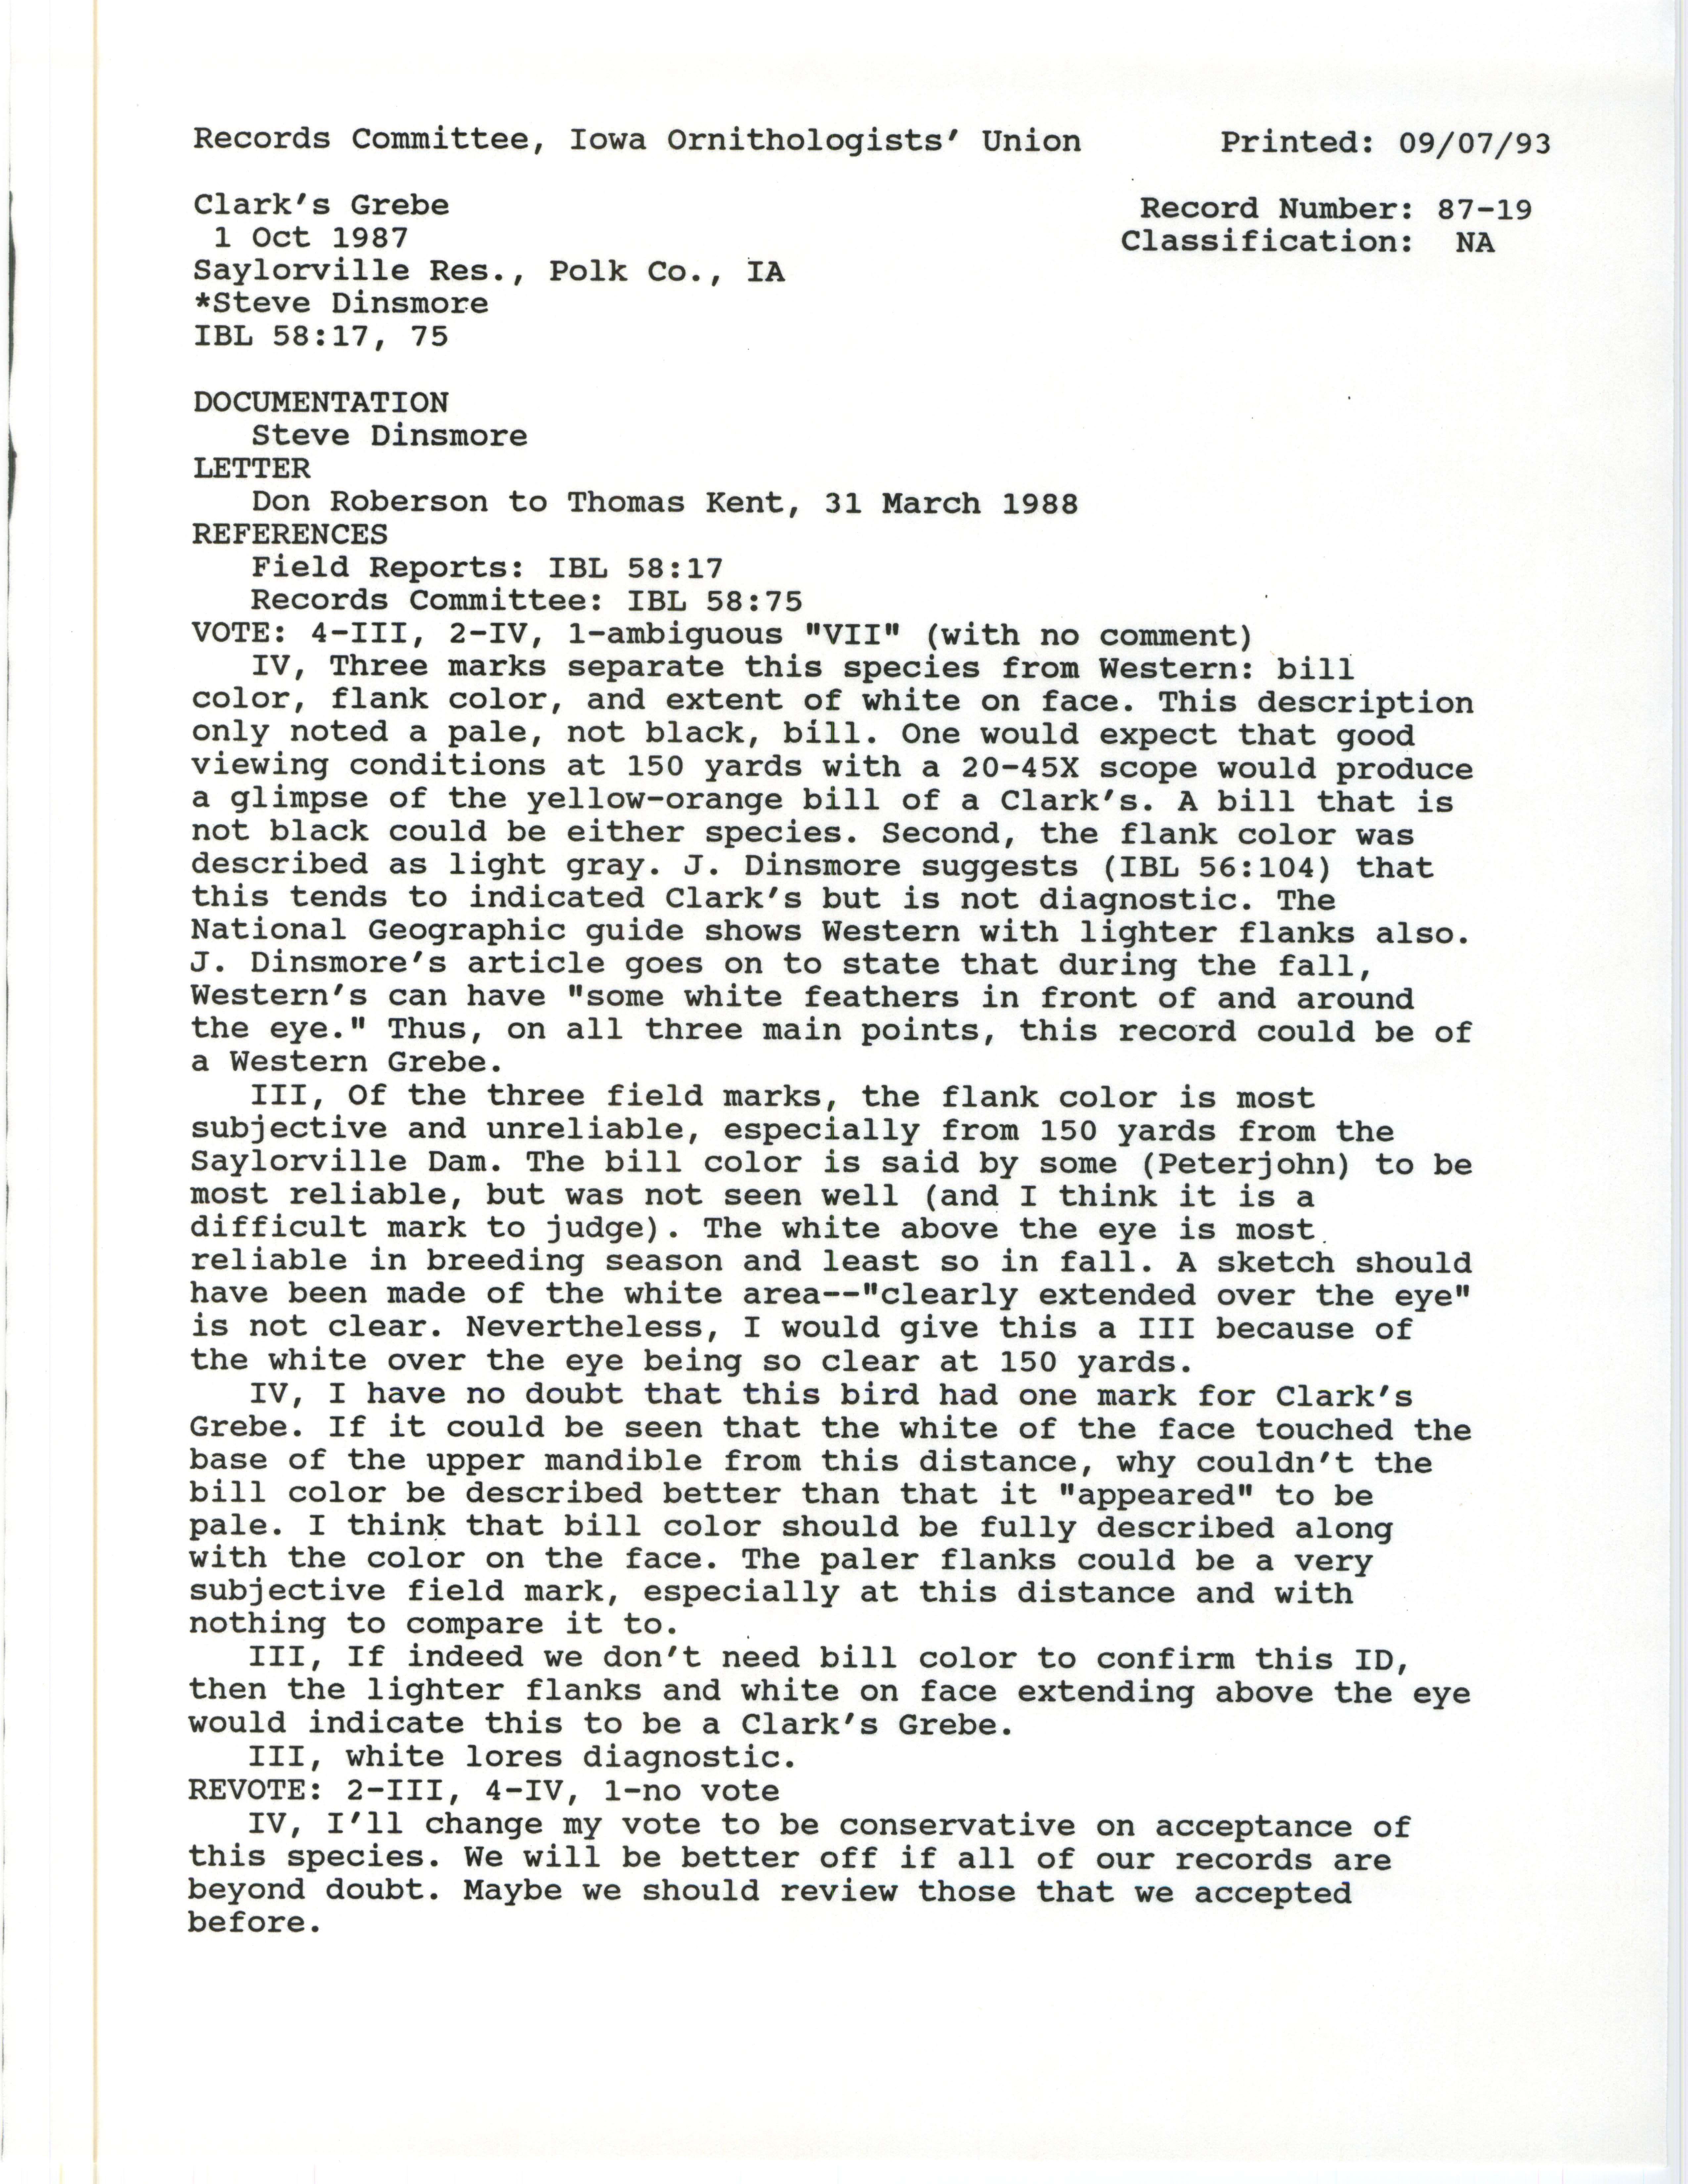 Records Committee review for rare bird sighting of Clark's Grebe at Saylorville Reservoir, 1987